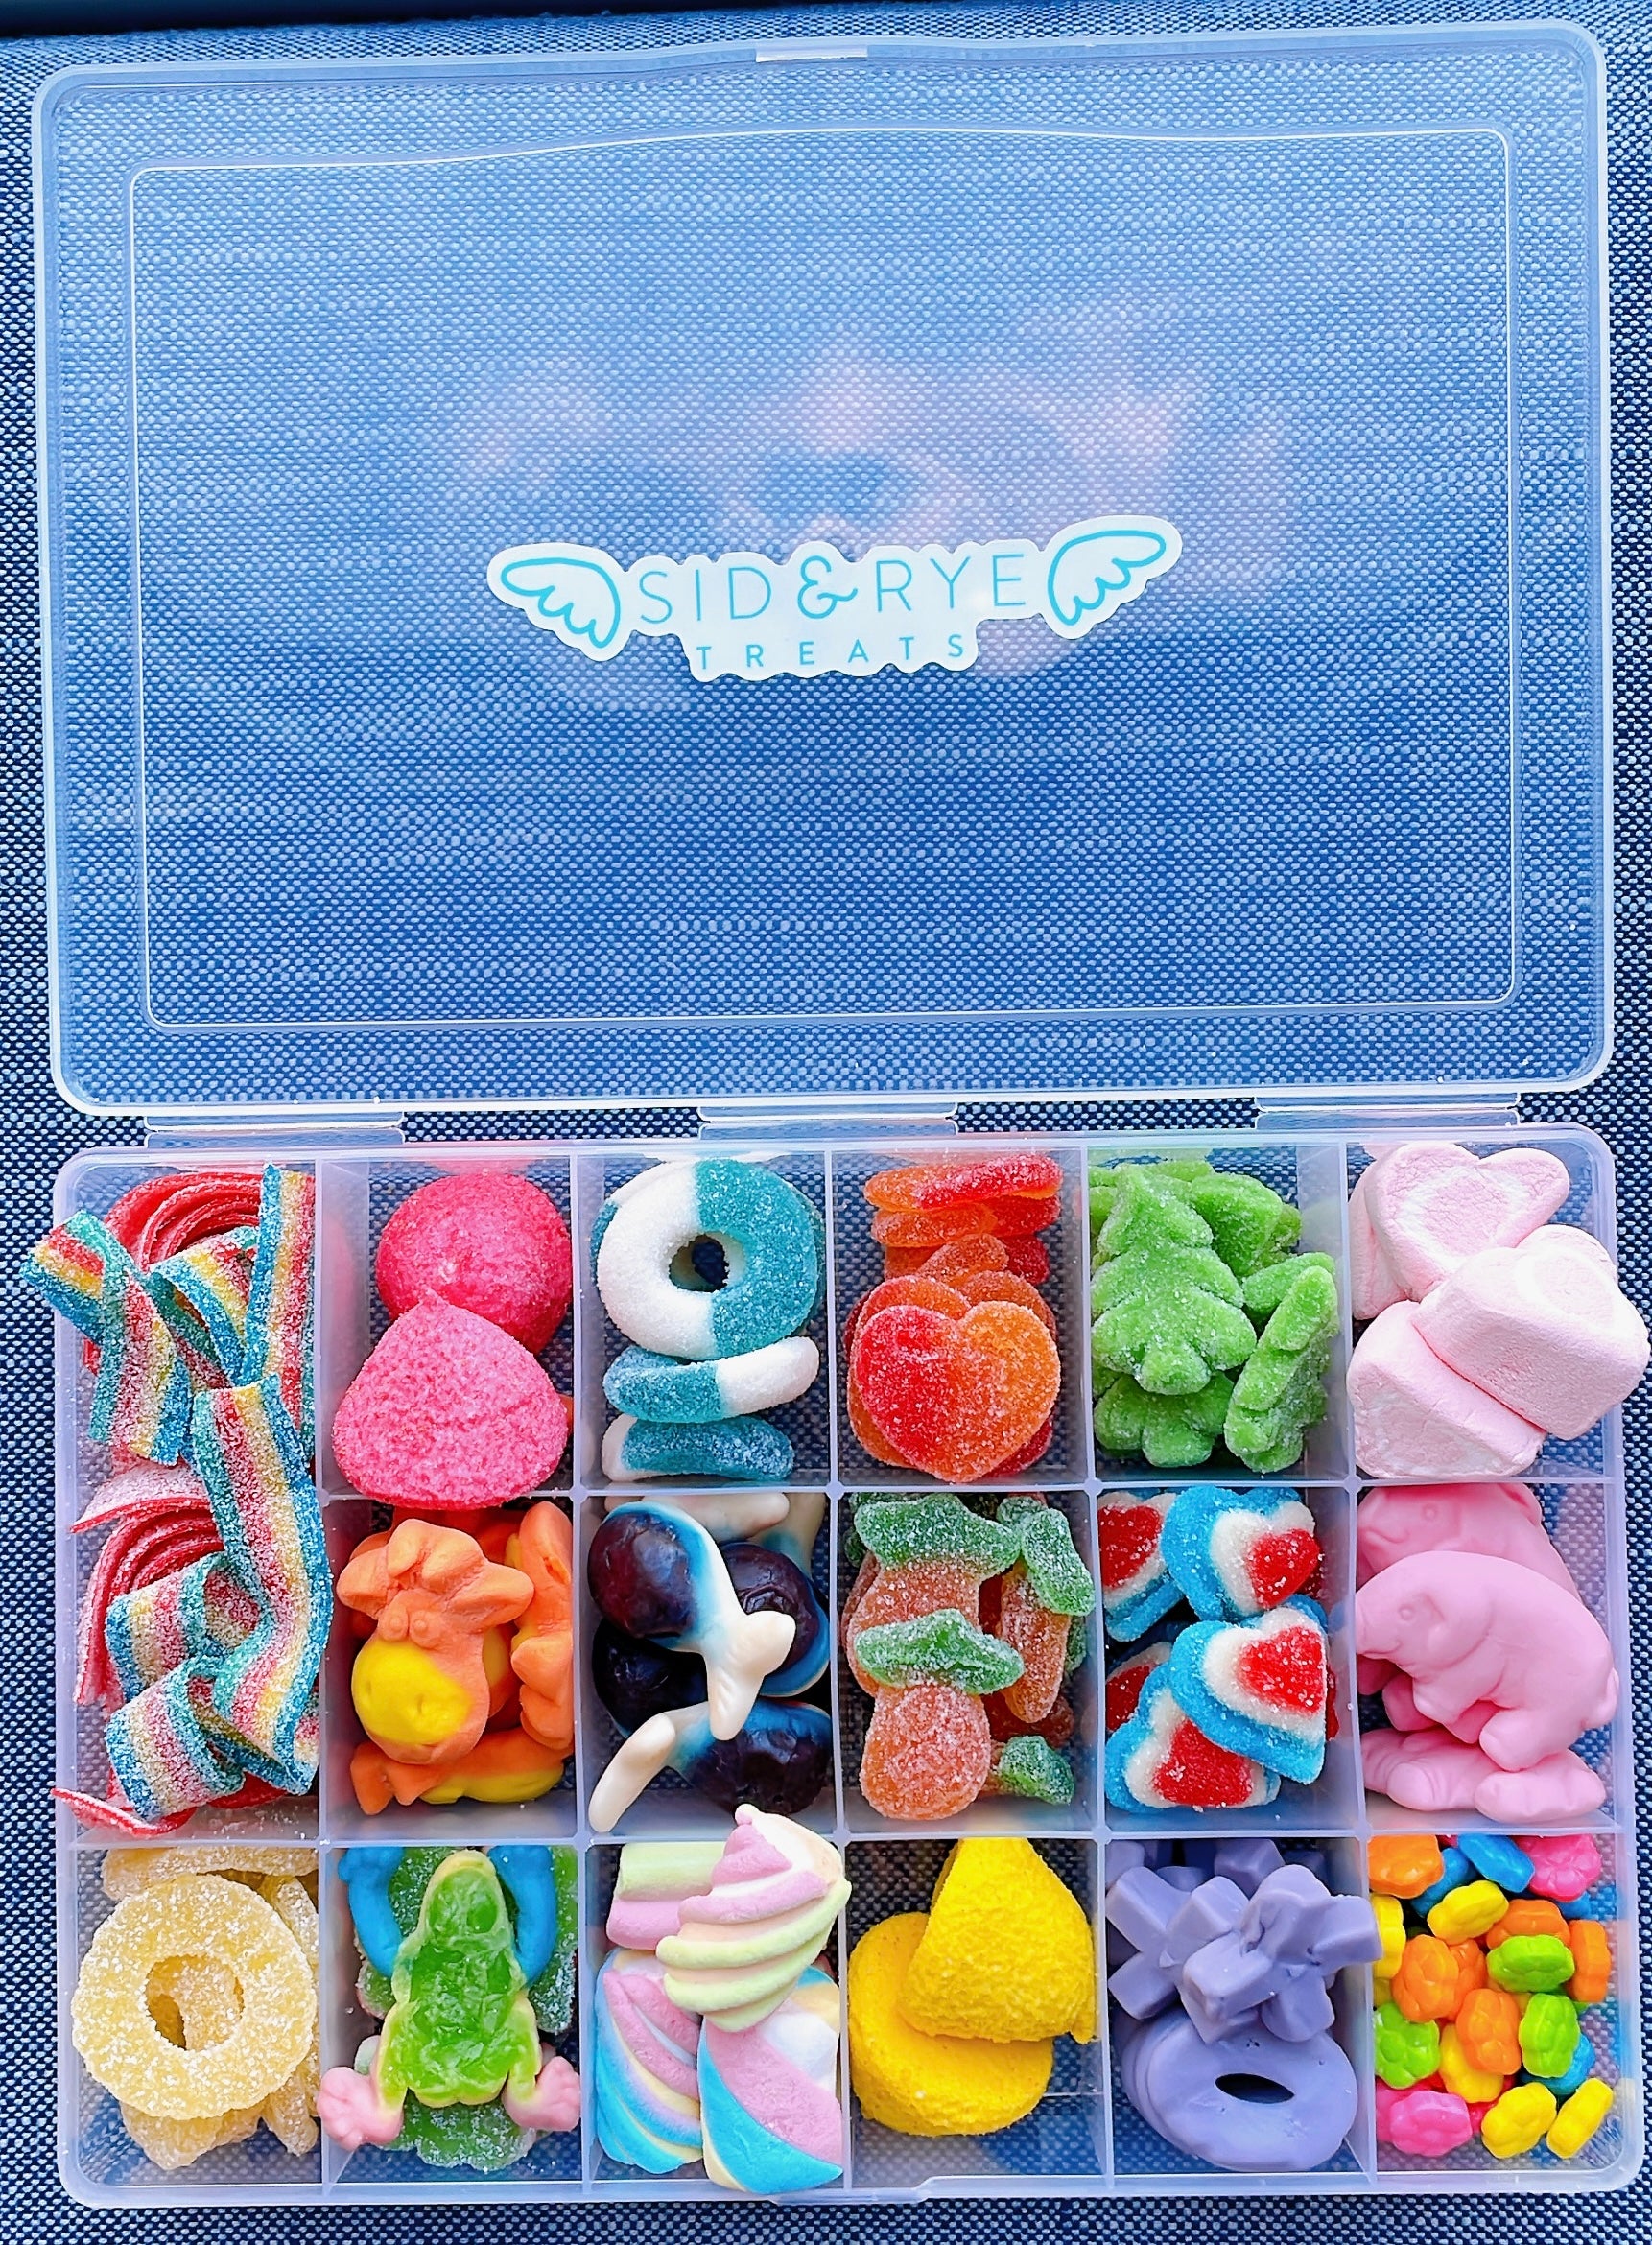 Candy Case- Edible Slime edition!